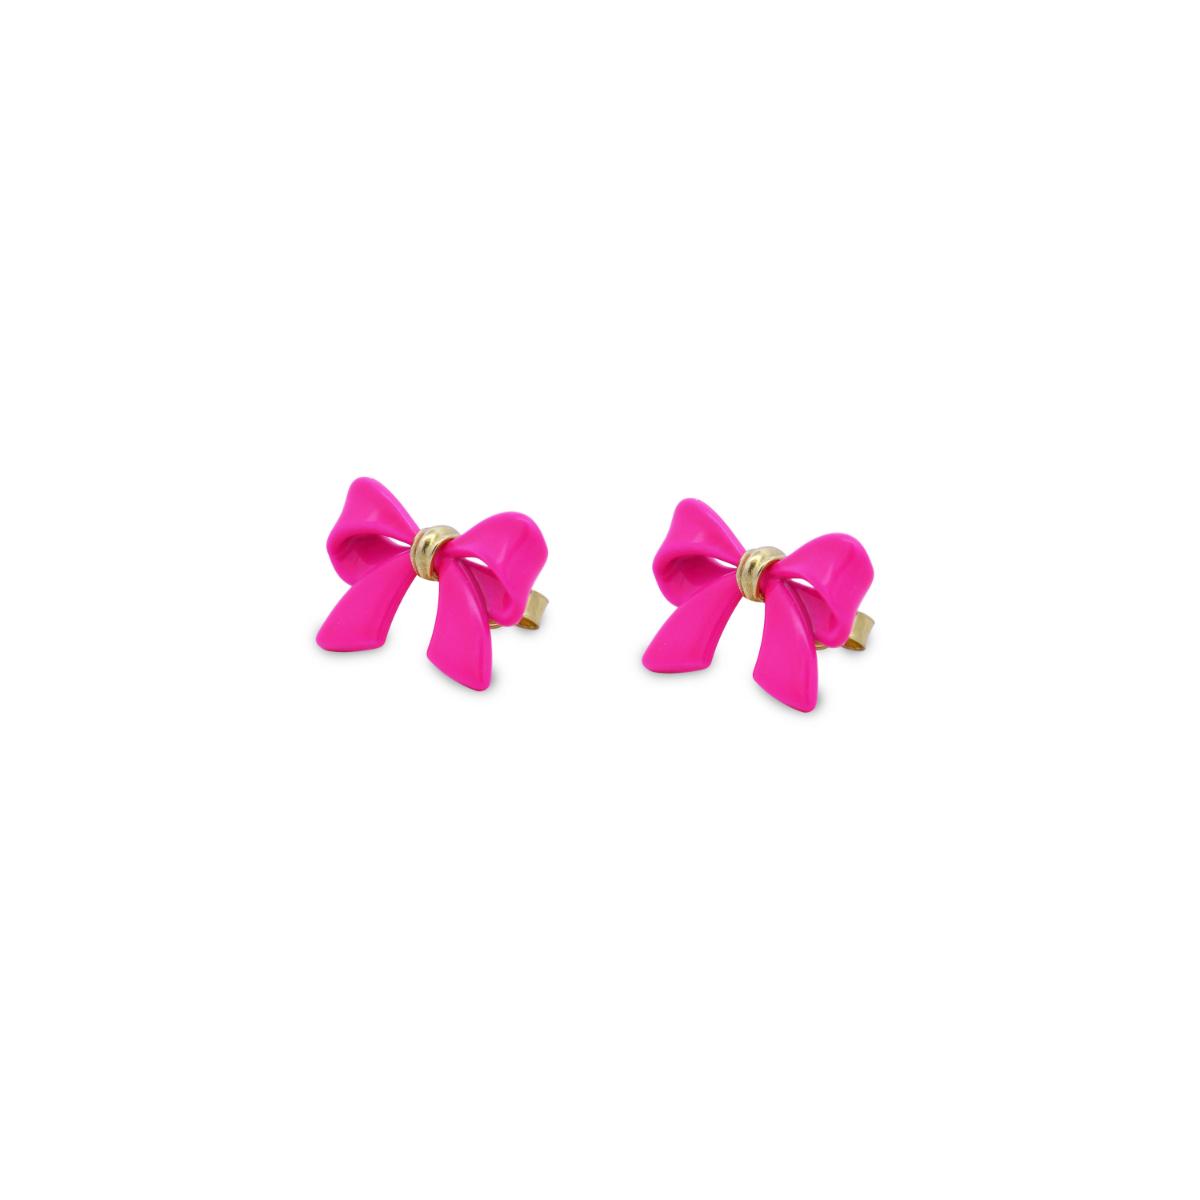 Earrings - Pair of earrings big bow neon pink - CANDY BOW - 1 | Rue des Mille